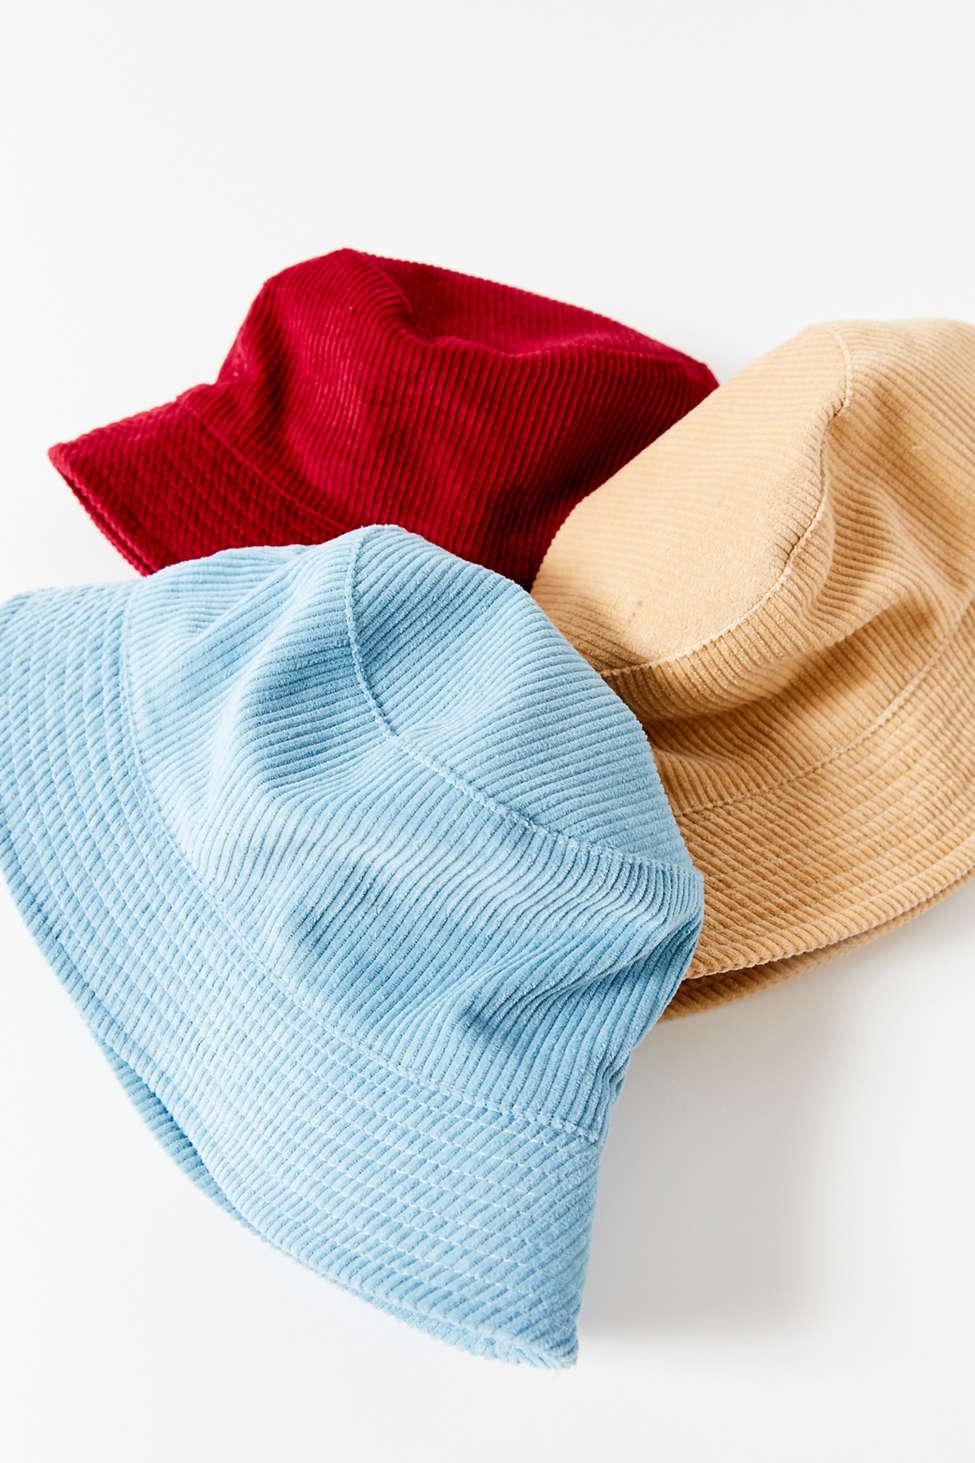 Urban Outfitters Uo Corduroy Bucket Hat | Lyst